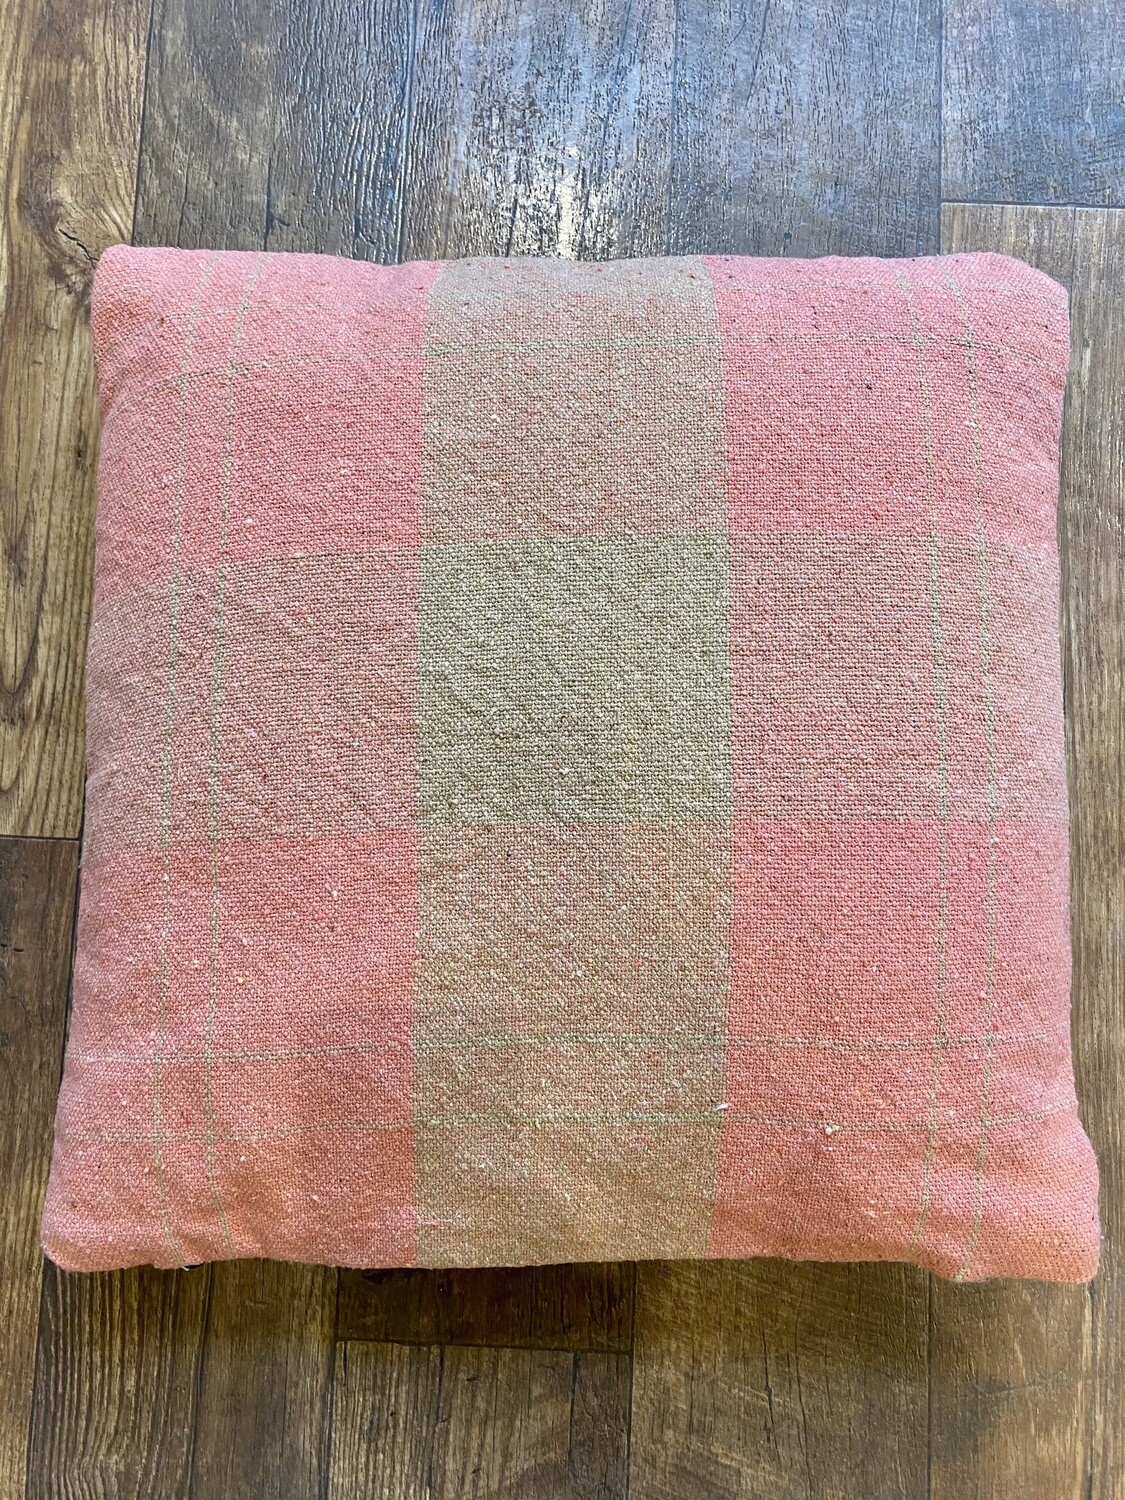 20" Square Woven Recycled Cotton Blend Pink Tan Plaid Pillow